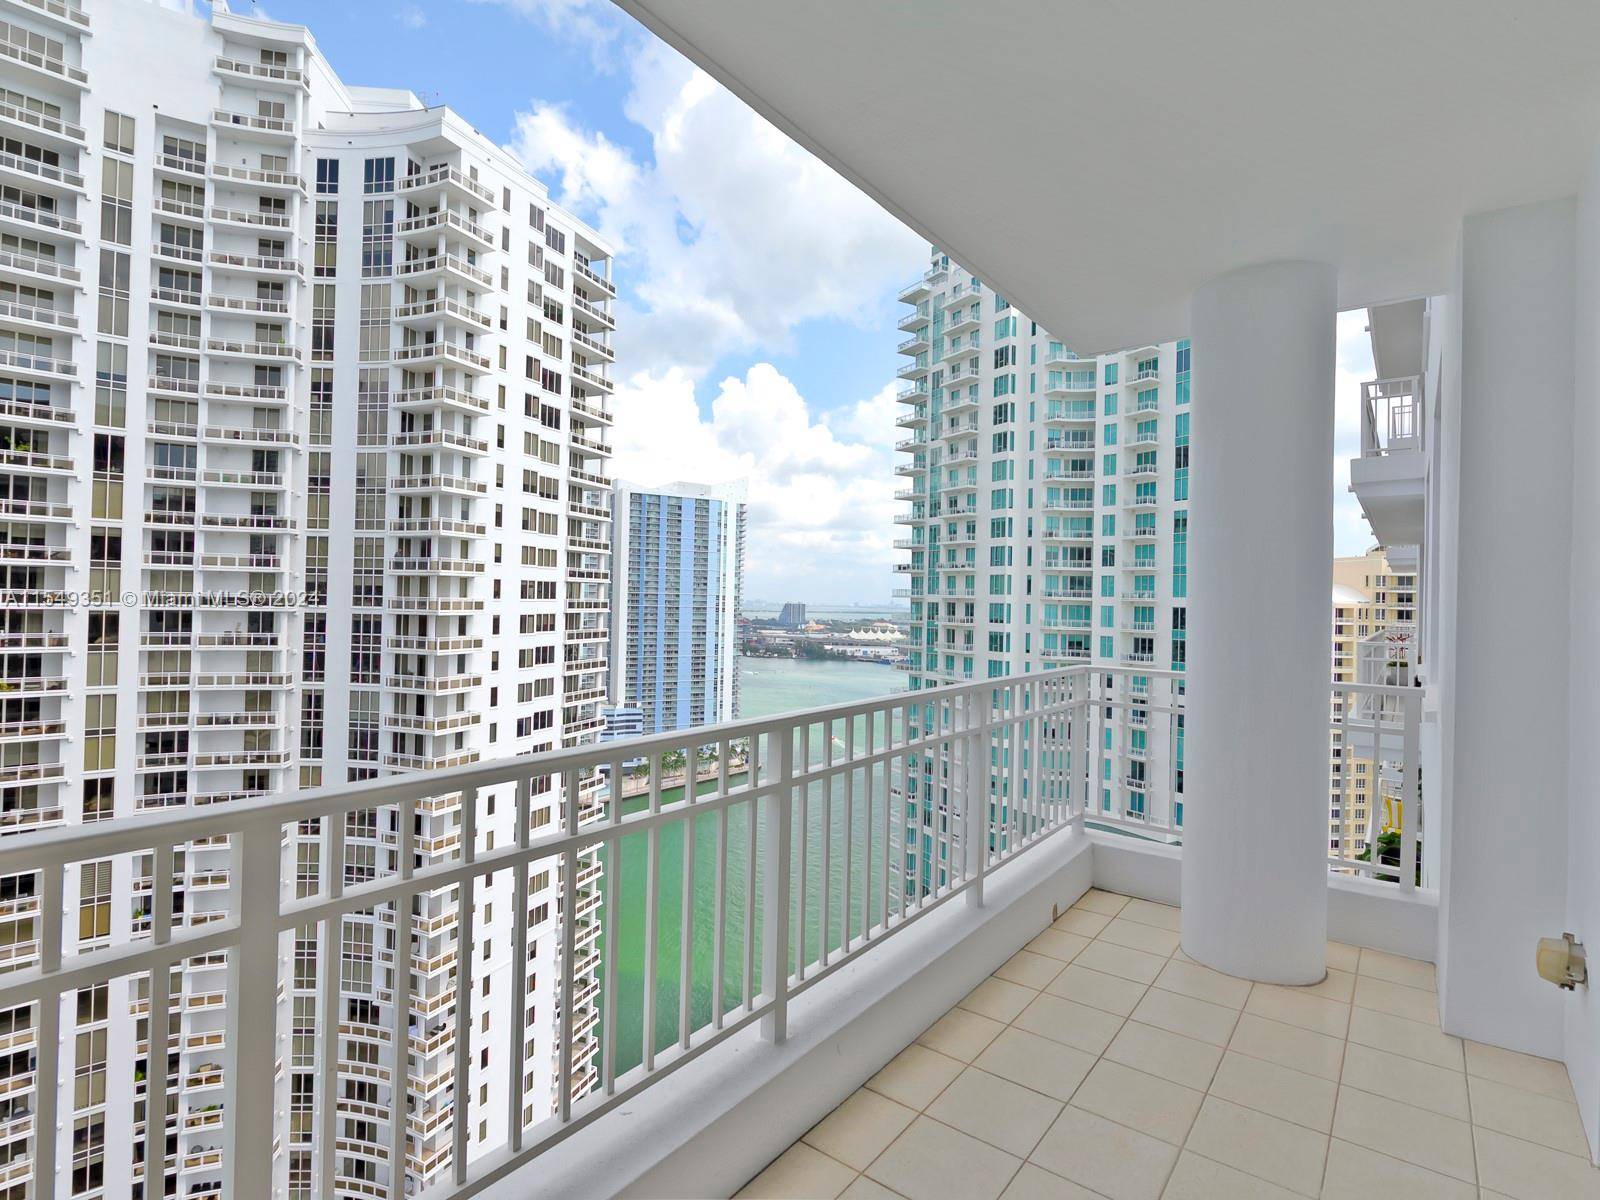 Enjoy the benefits of living at the prestigious Courts at Brickell Key.